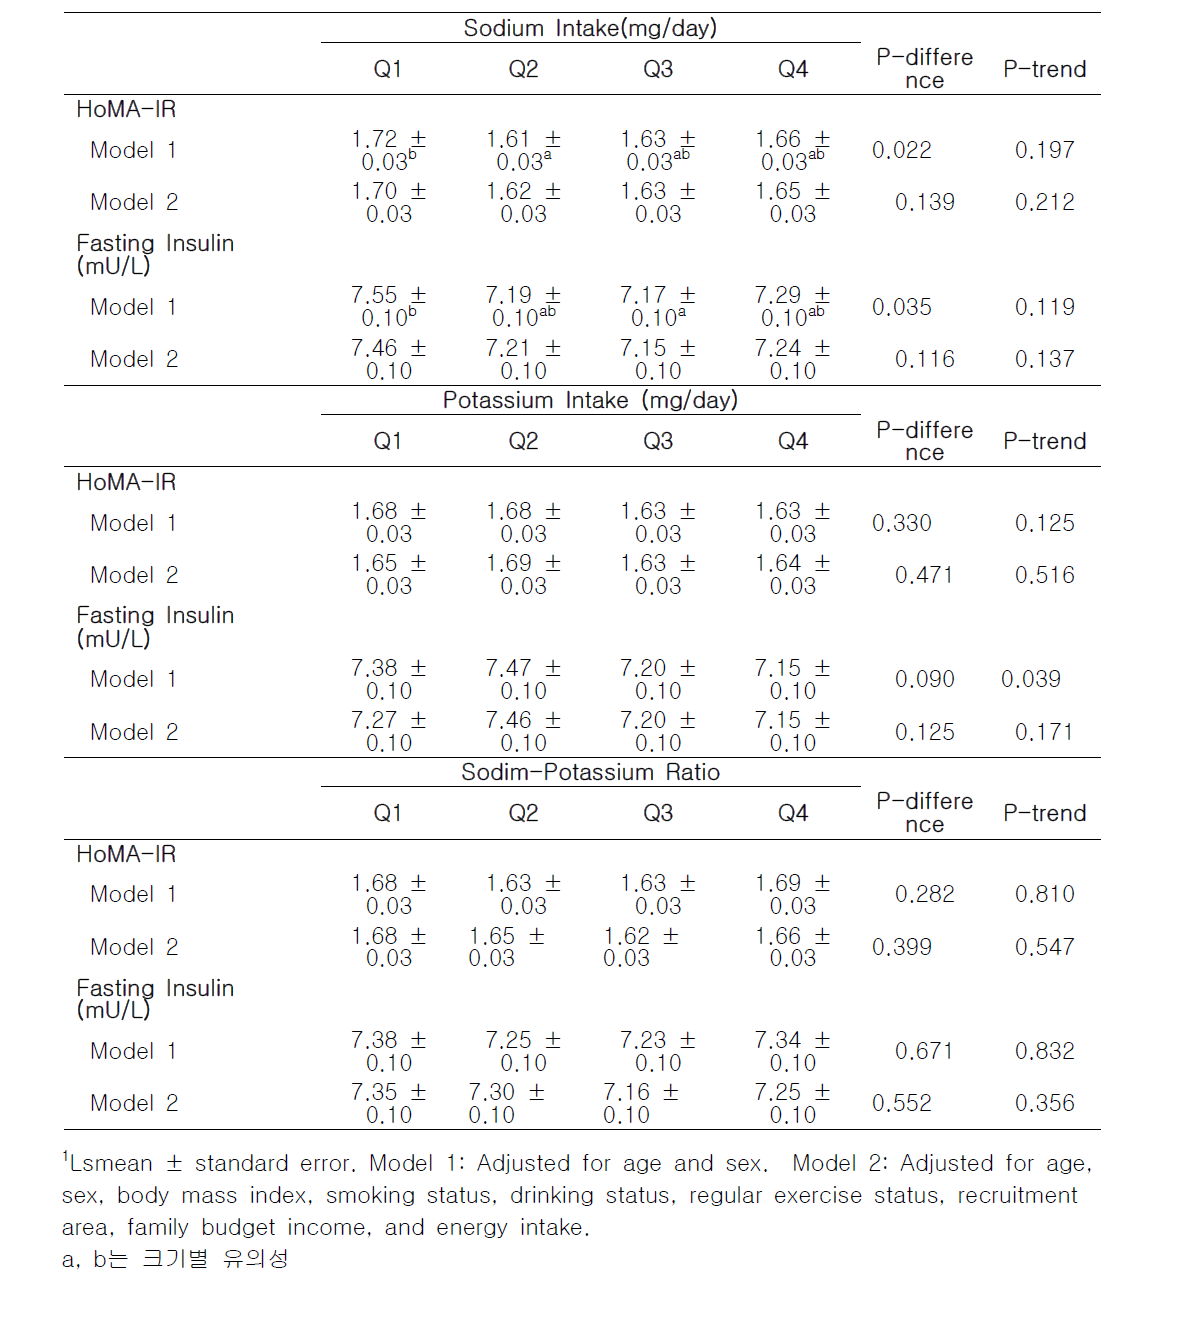 Adjusted means of HoMA-IR and fasting insulin and standard error according to dietary factors in Sample 2